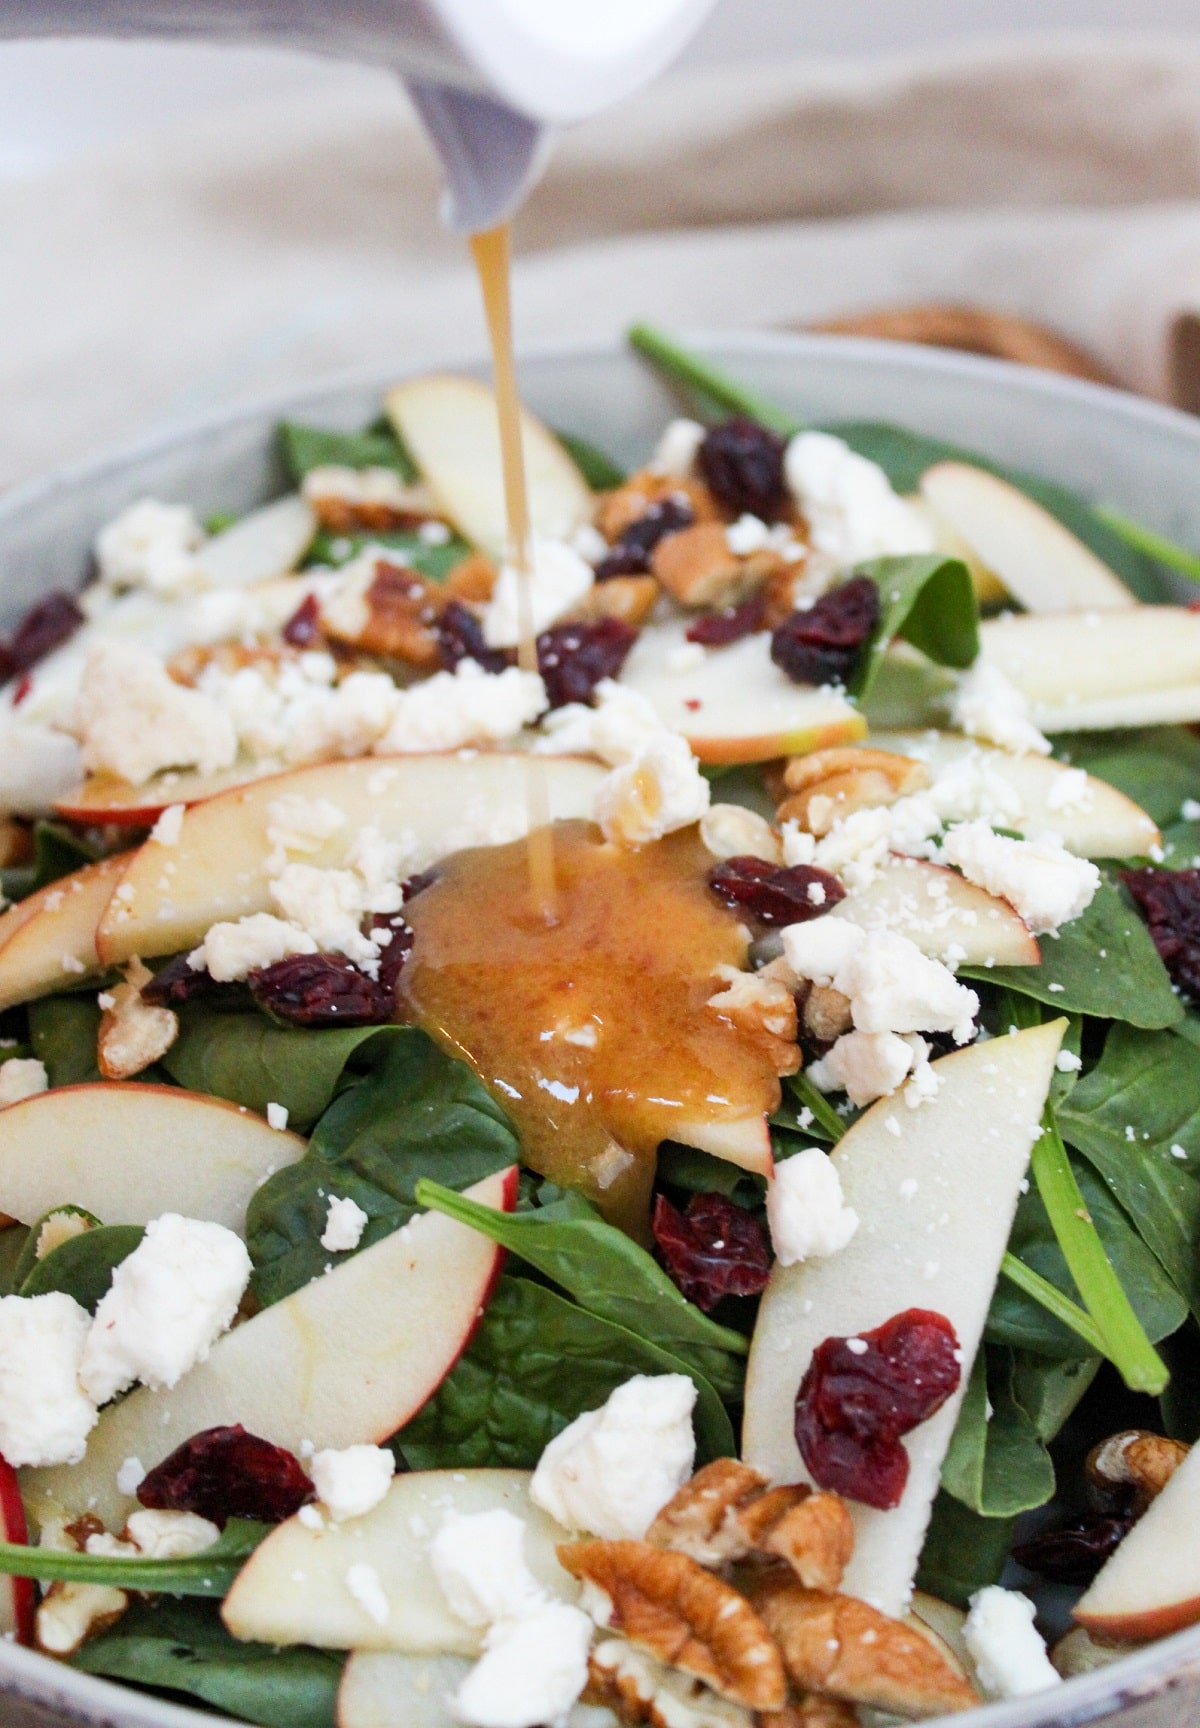 spinach in a gray bowl topped with sliced apples, pecans, crumbled feta cheese, and dried cranberries. Cranberry dressing poured over the top.